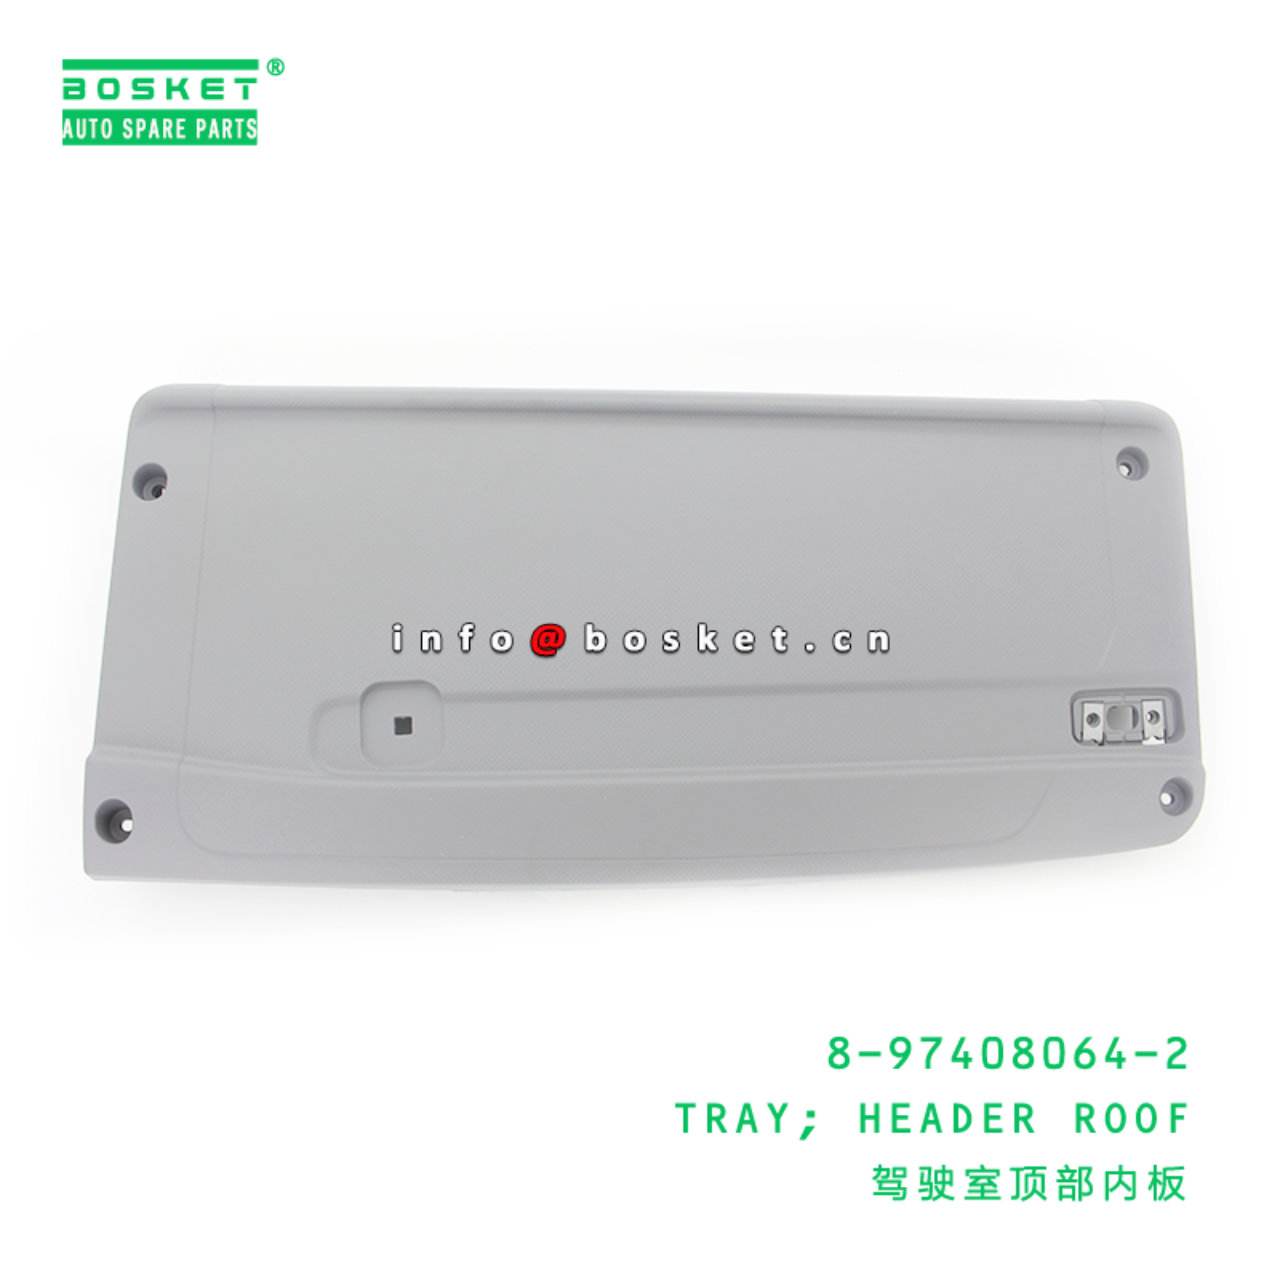 8-97408064-2 Header Roof Tray Suitable for ISUZU NMR 8974080642